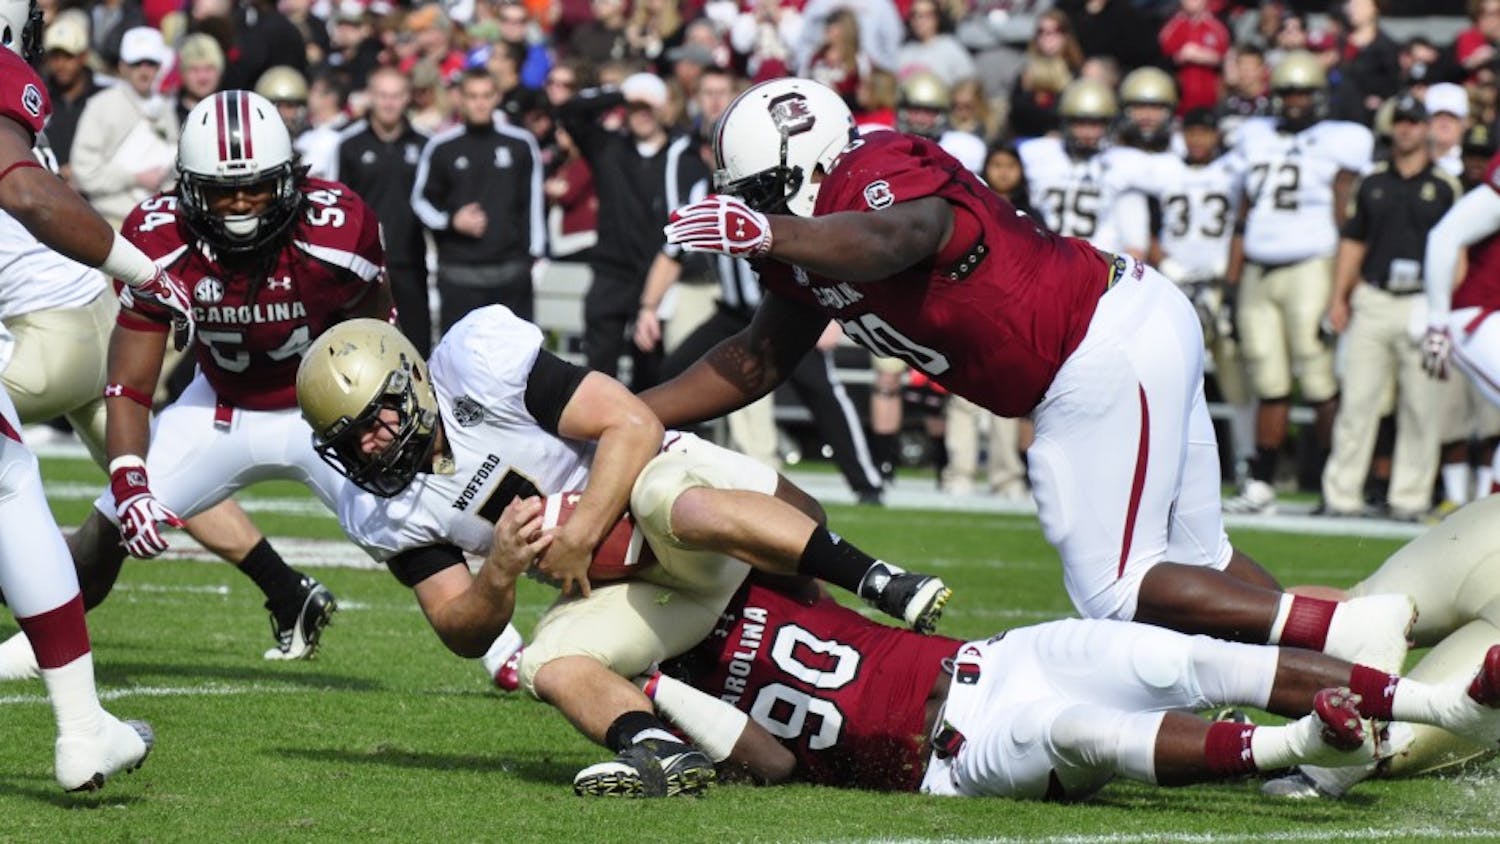 	Major programs schedule weak nonconference opponents, such as Wofford vs. South Carolina in 2012.